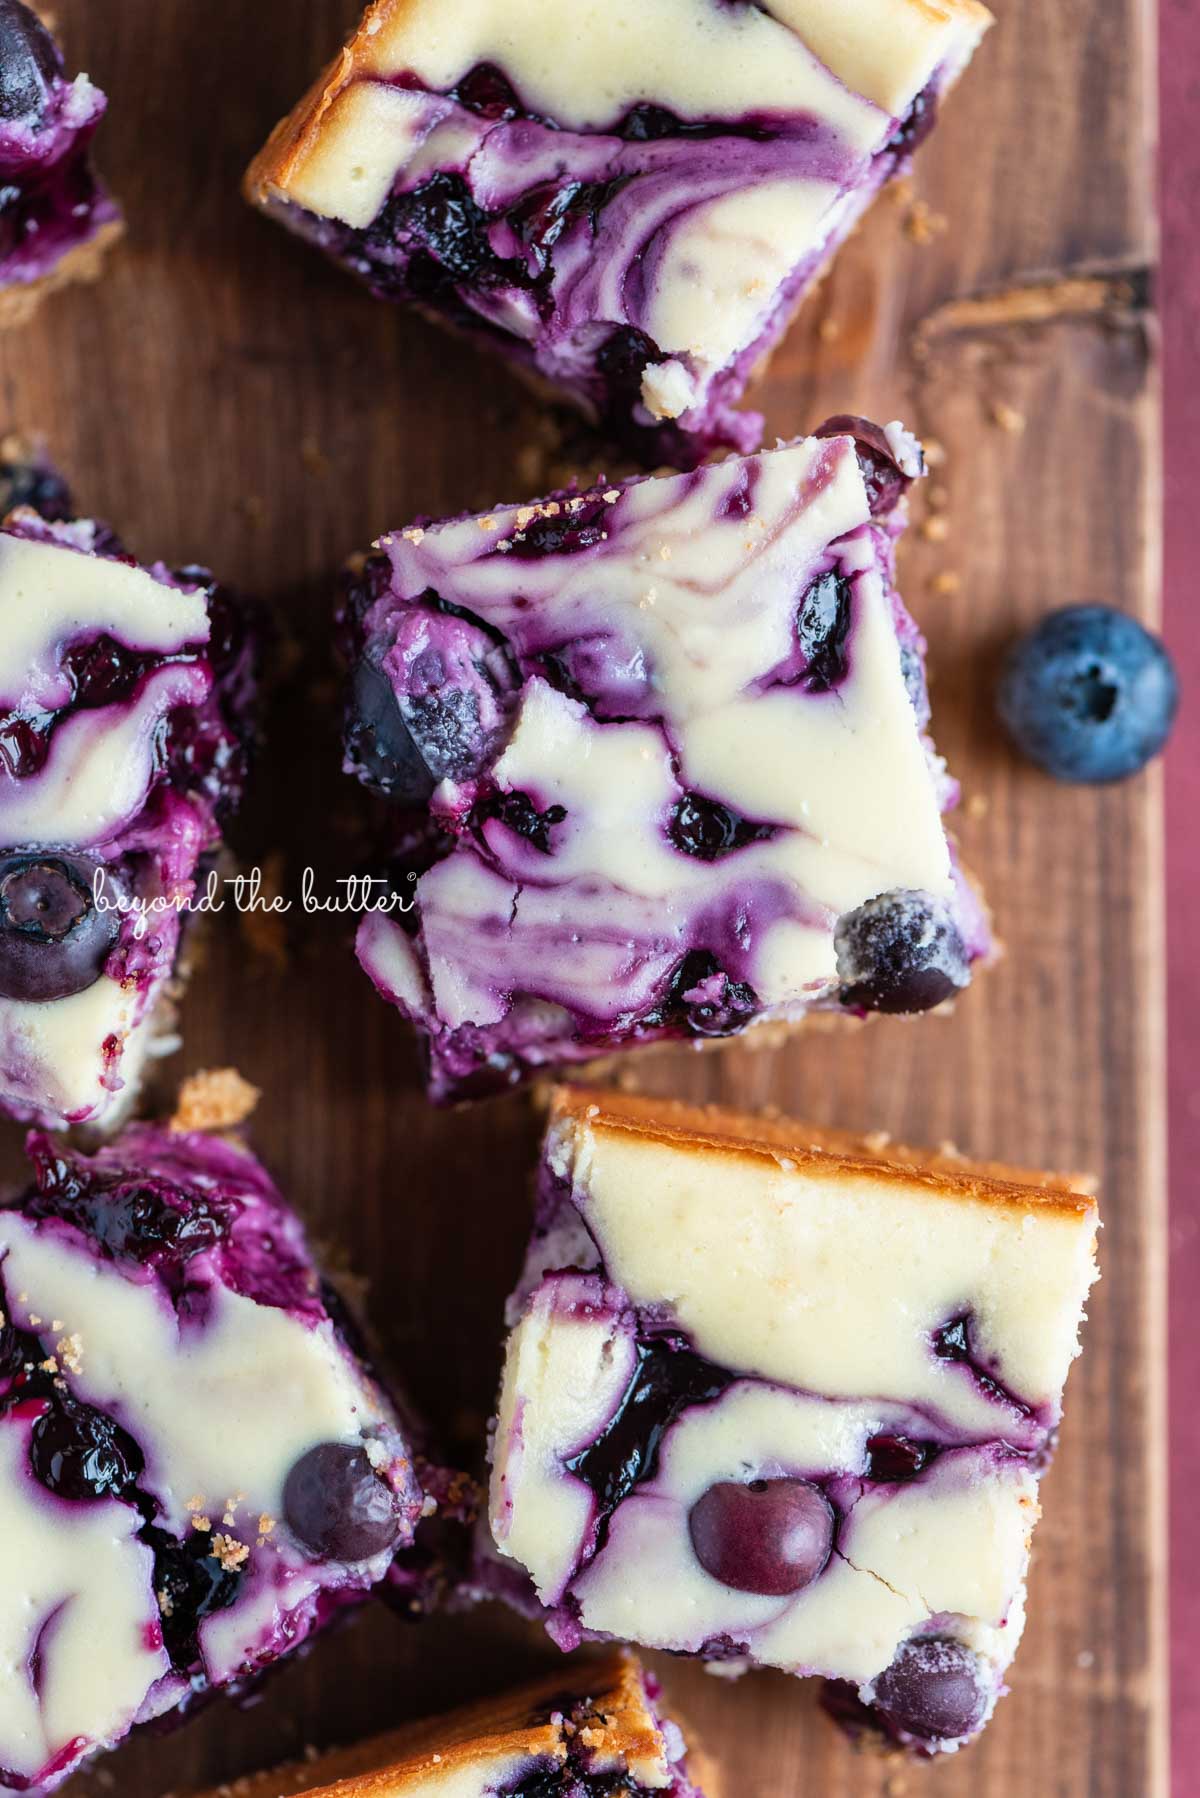 Sliced blueberry swirl cheesecake bars on a vintage cutting board from BeyondtheButter.com | © Beyond the Butter®